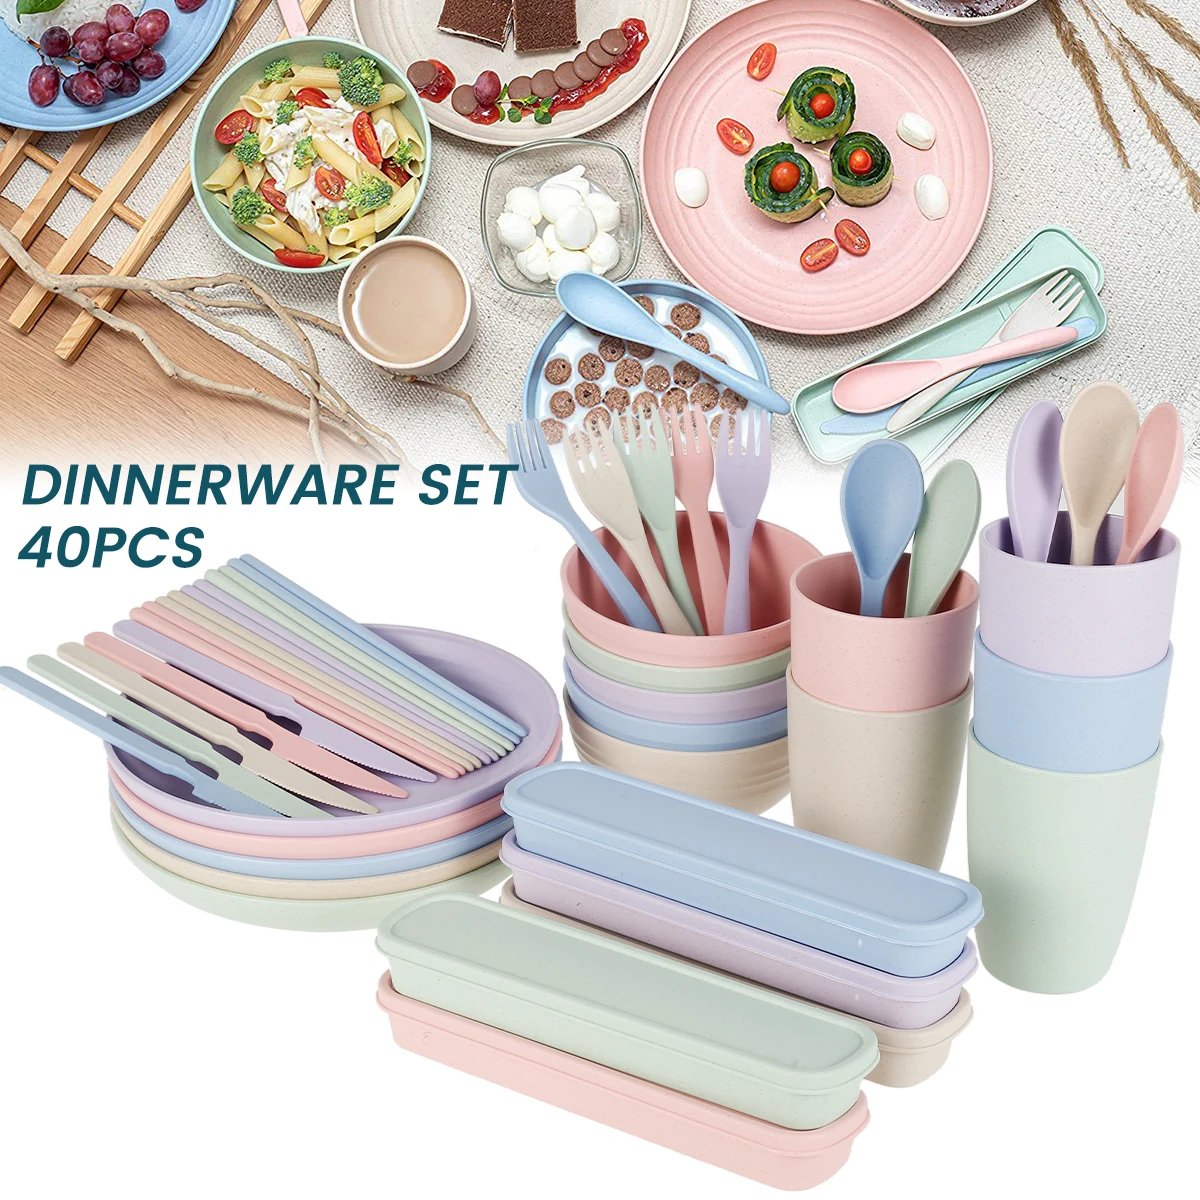 

NEW Wheat Straw Dinner Sets of 5 (40Pcs) Unbreakable Lightweight Dinnerware Set Large Dinner Plates Cups Bowls Cutlery Microwave